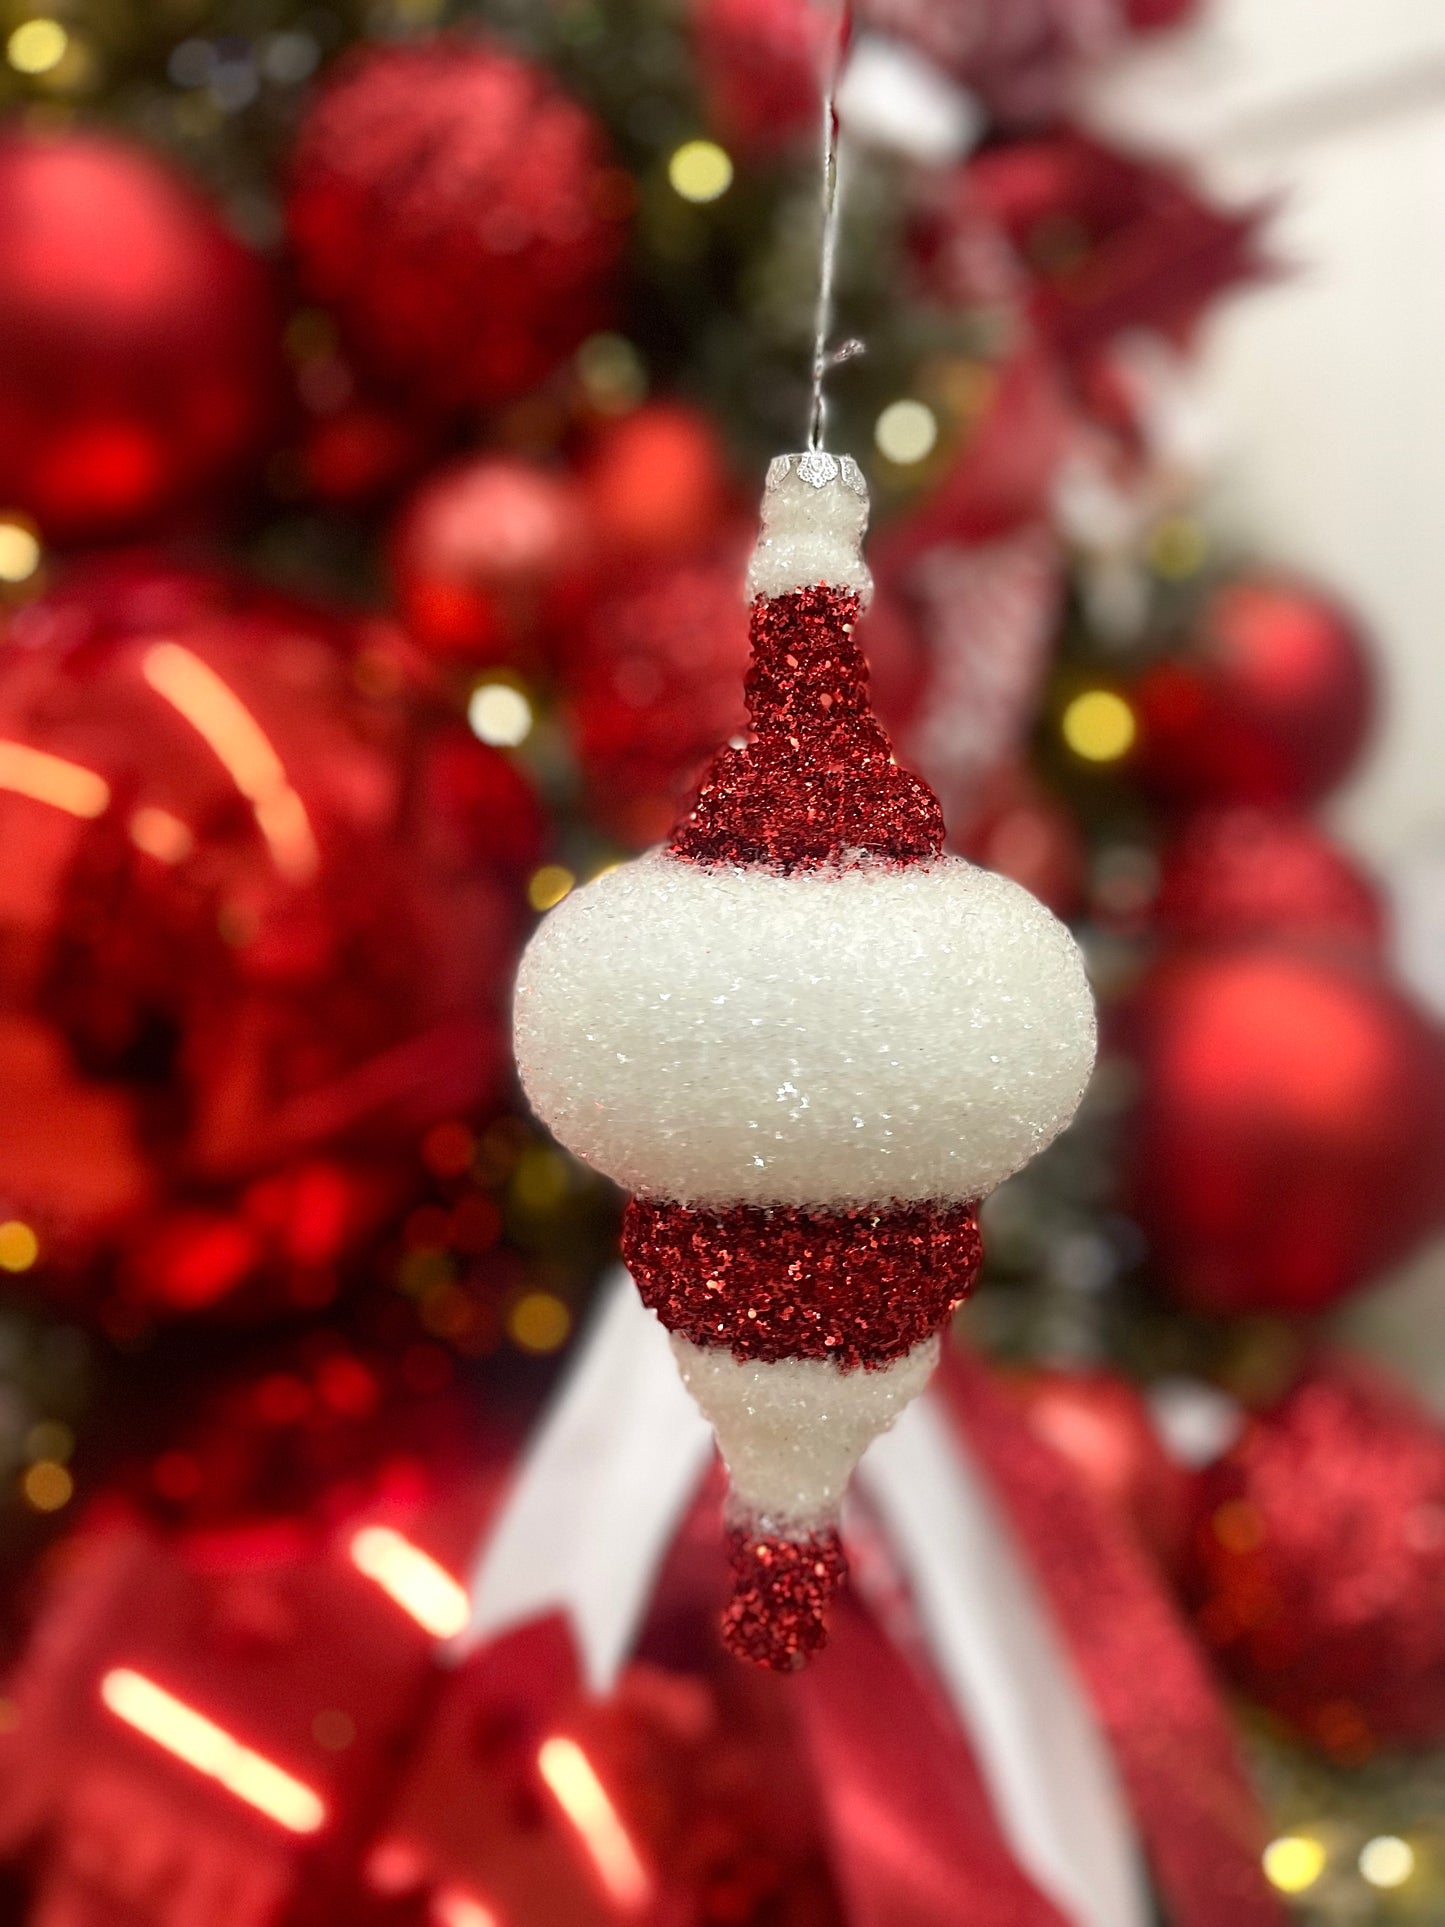 Red White Glitter Finial Ornament 2 Styles